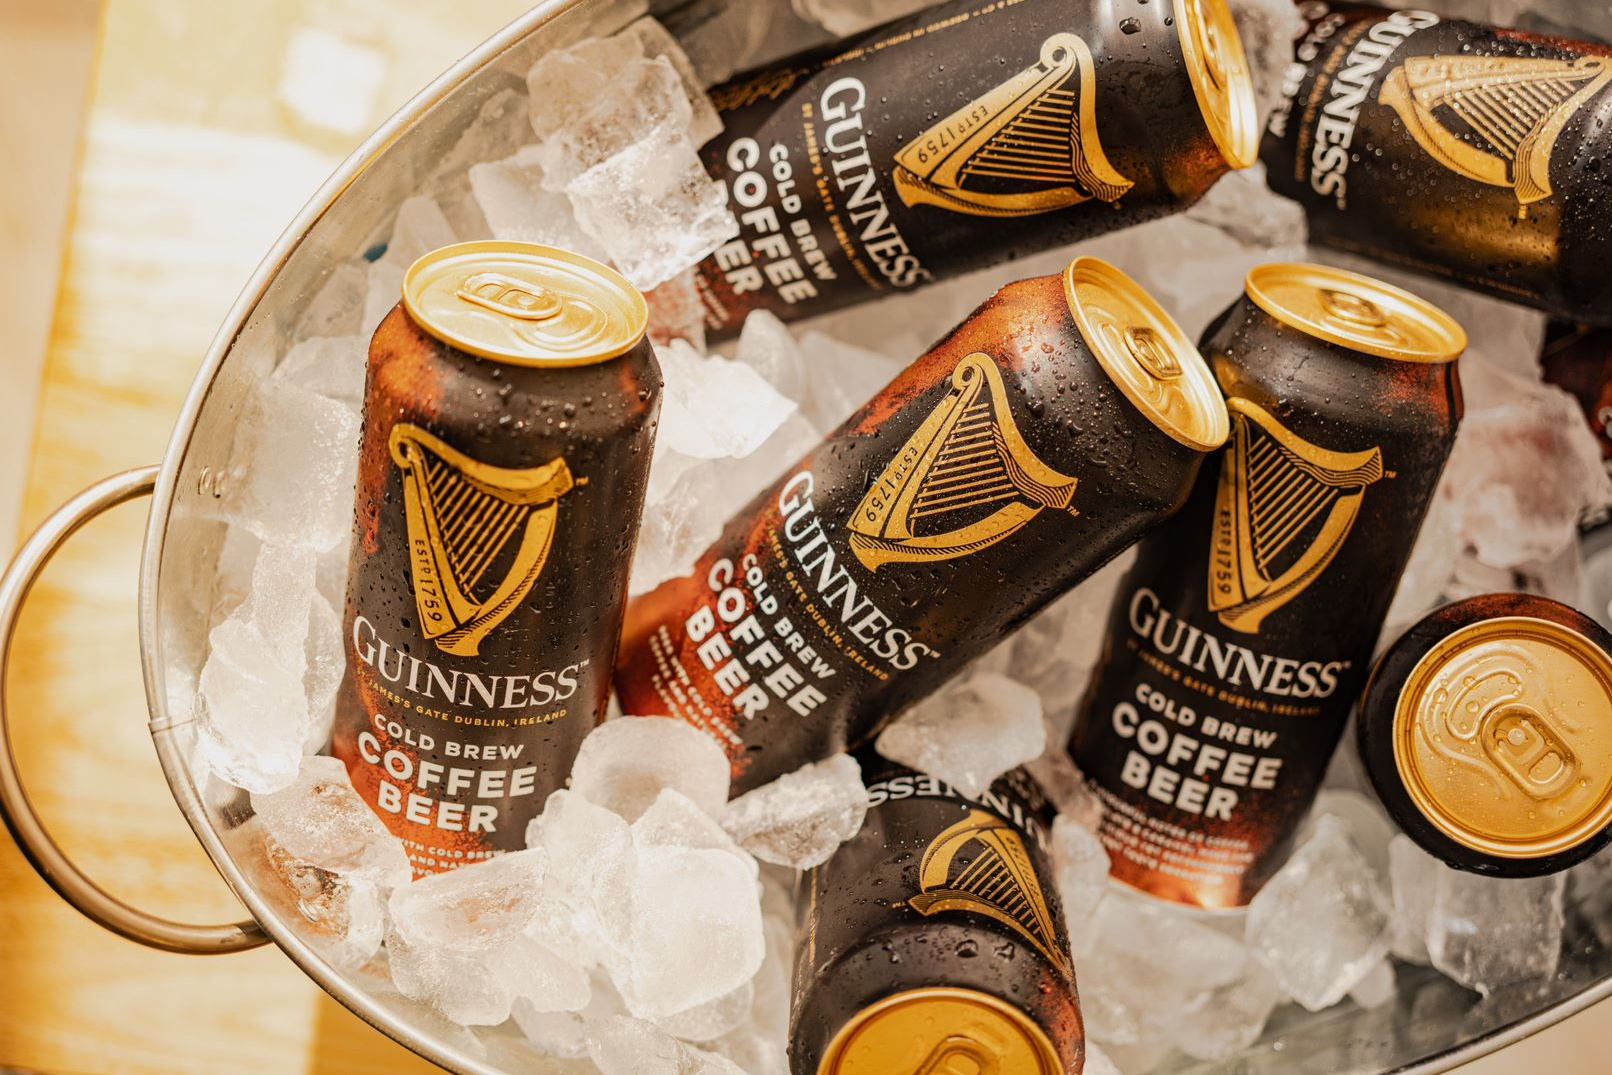 Guinness Draught 0.0% Stout 50cl